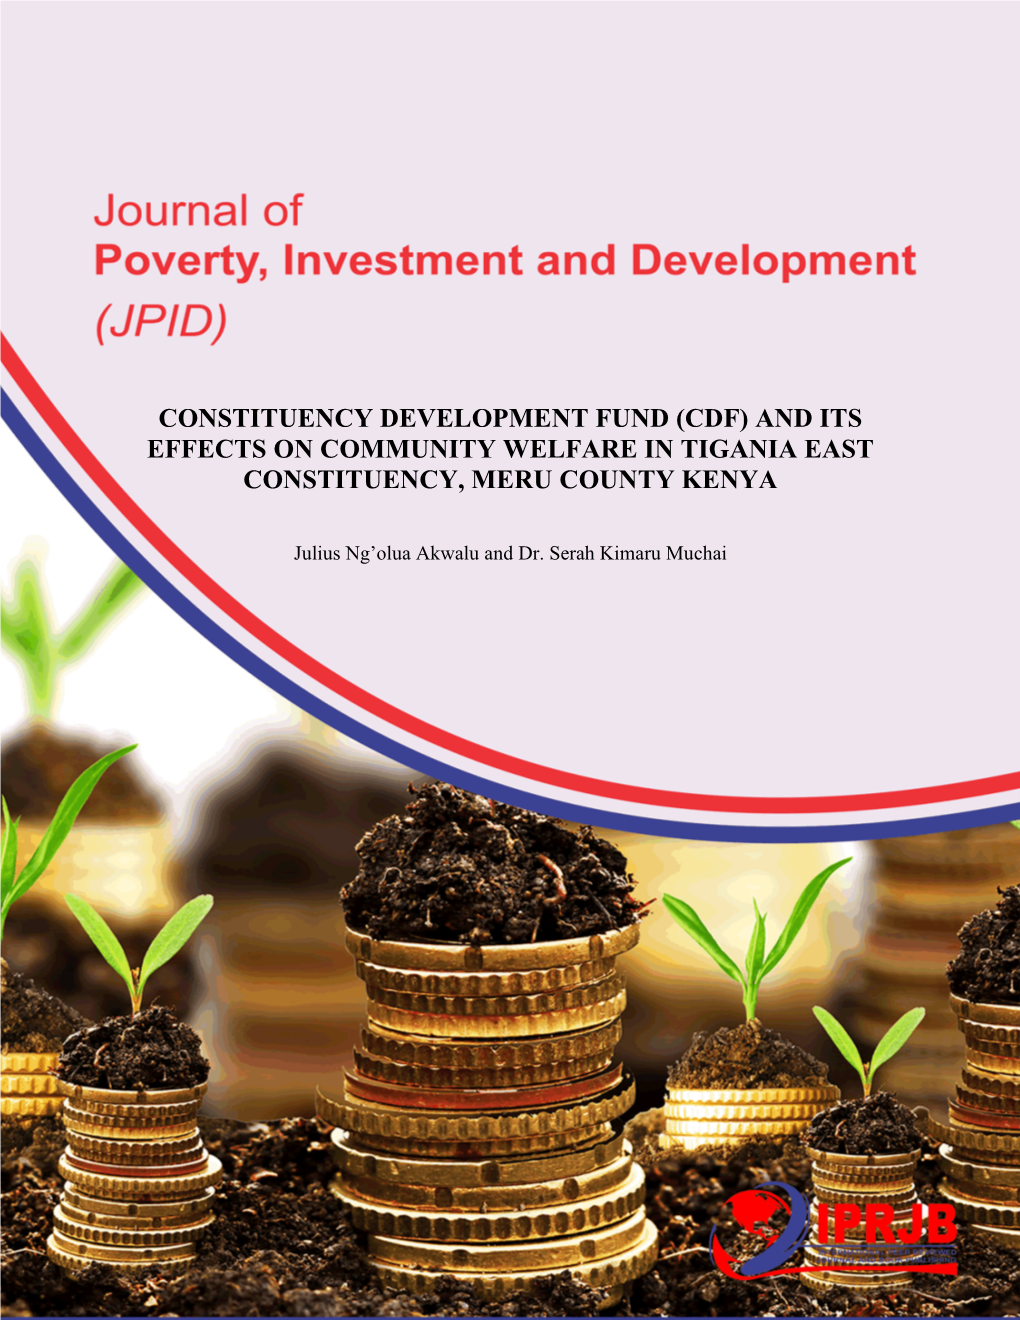 Constituency Development Fund (Cdf) and Its Effects on Community Welfare in Tigania East Constituency, Meru County Kenya